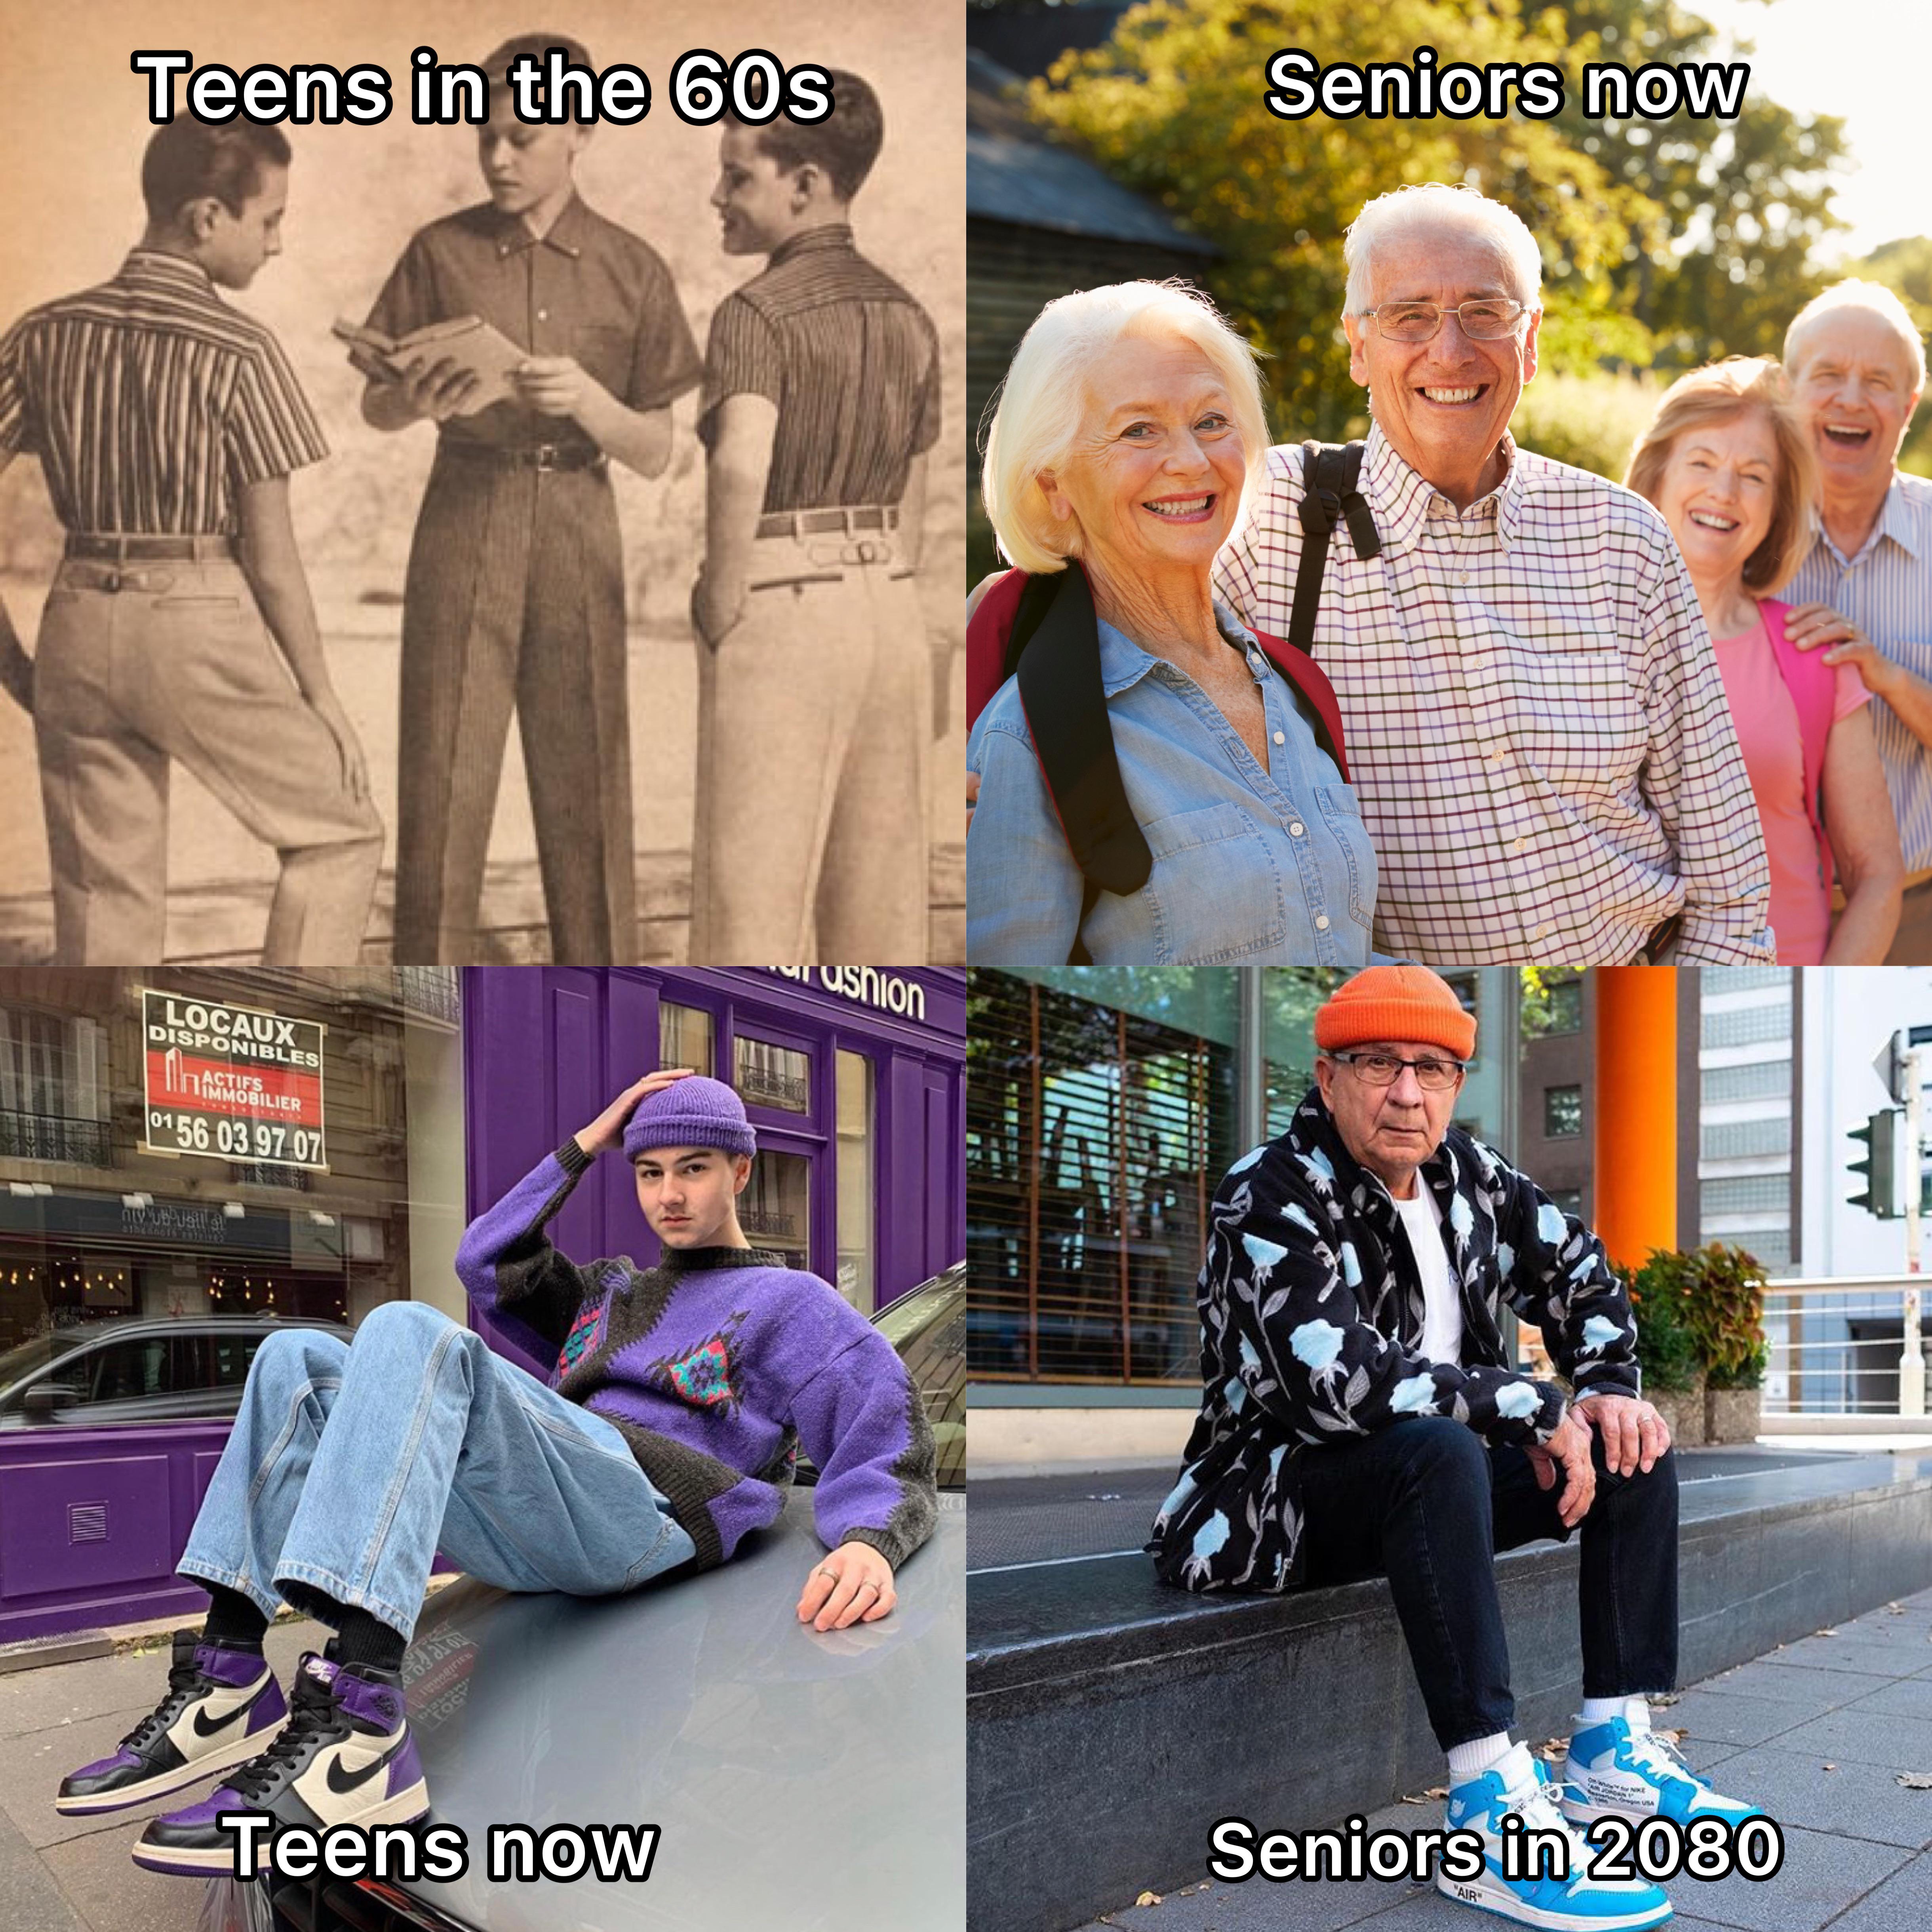 funny memes and pics - fun - Teens in the 60s Locaux Disponible 56 03.9707 Teens now Fushion Seniors now 13 Seniors in 2080